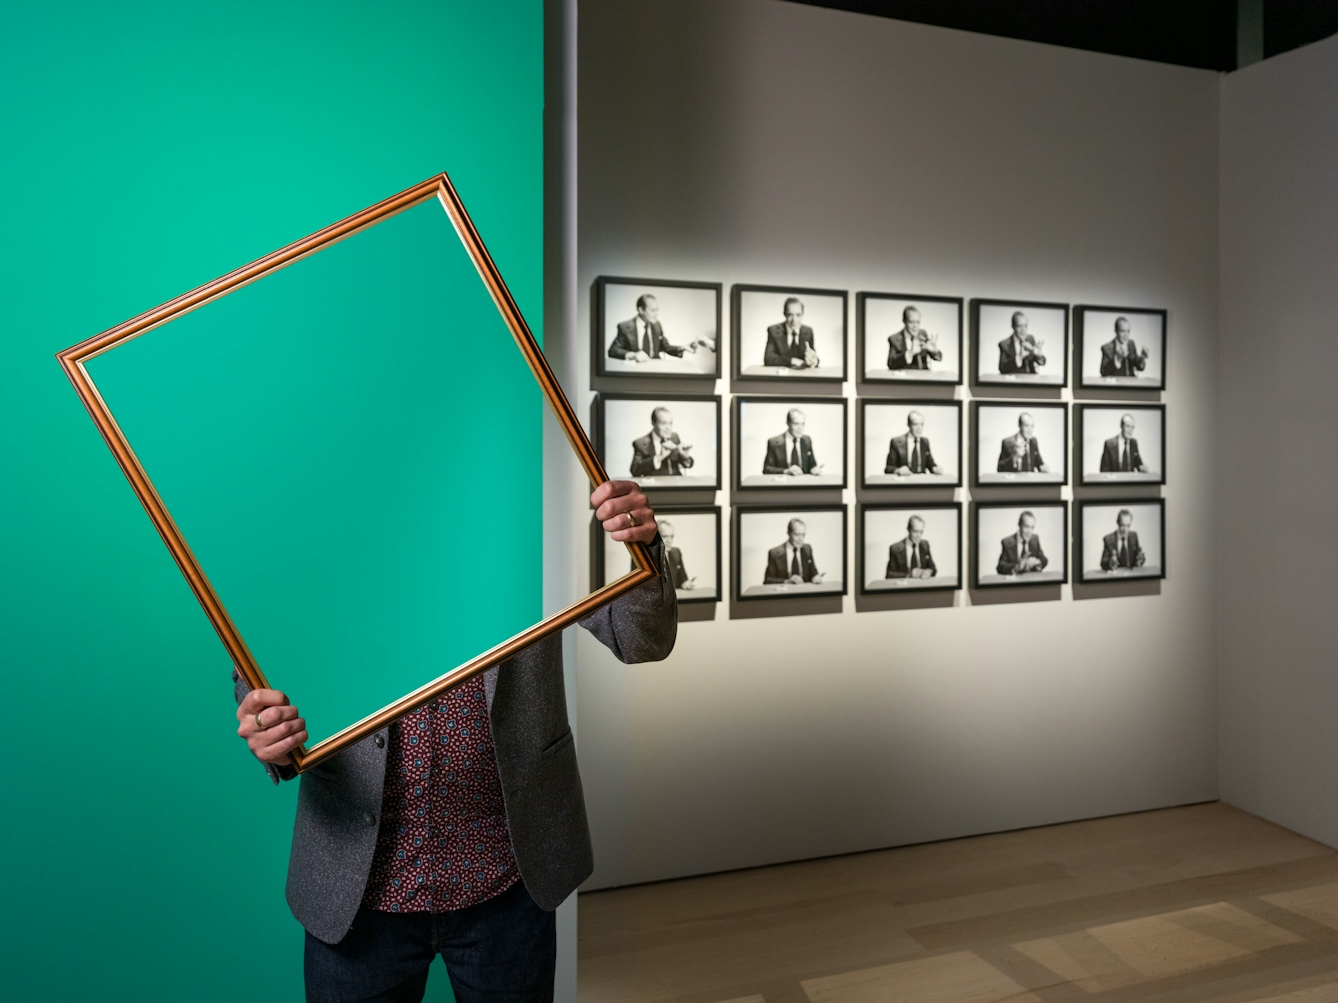 Photograph of a man in a gallery space holding a picture frame in front of his face and upper body. Within the picture frame you can see straight through him, as if his body and head have disappeared. In the background you can see a green painted wall and a grid of framed black and white photographs.